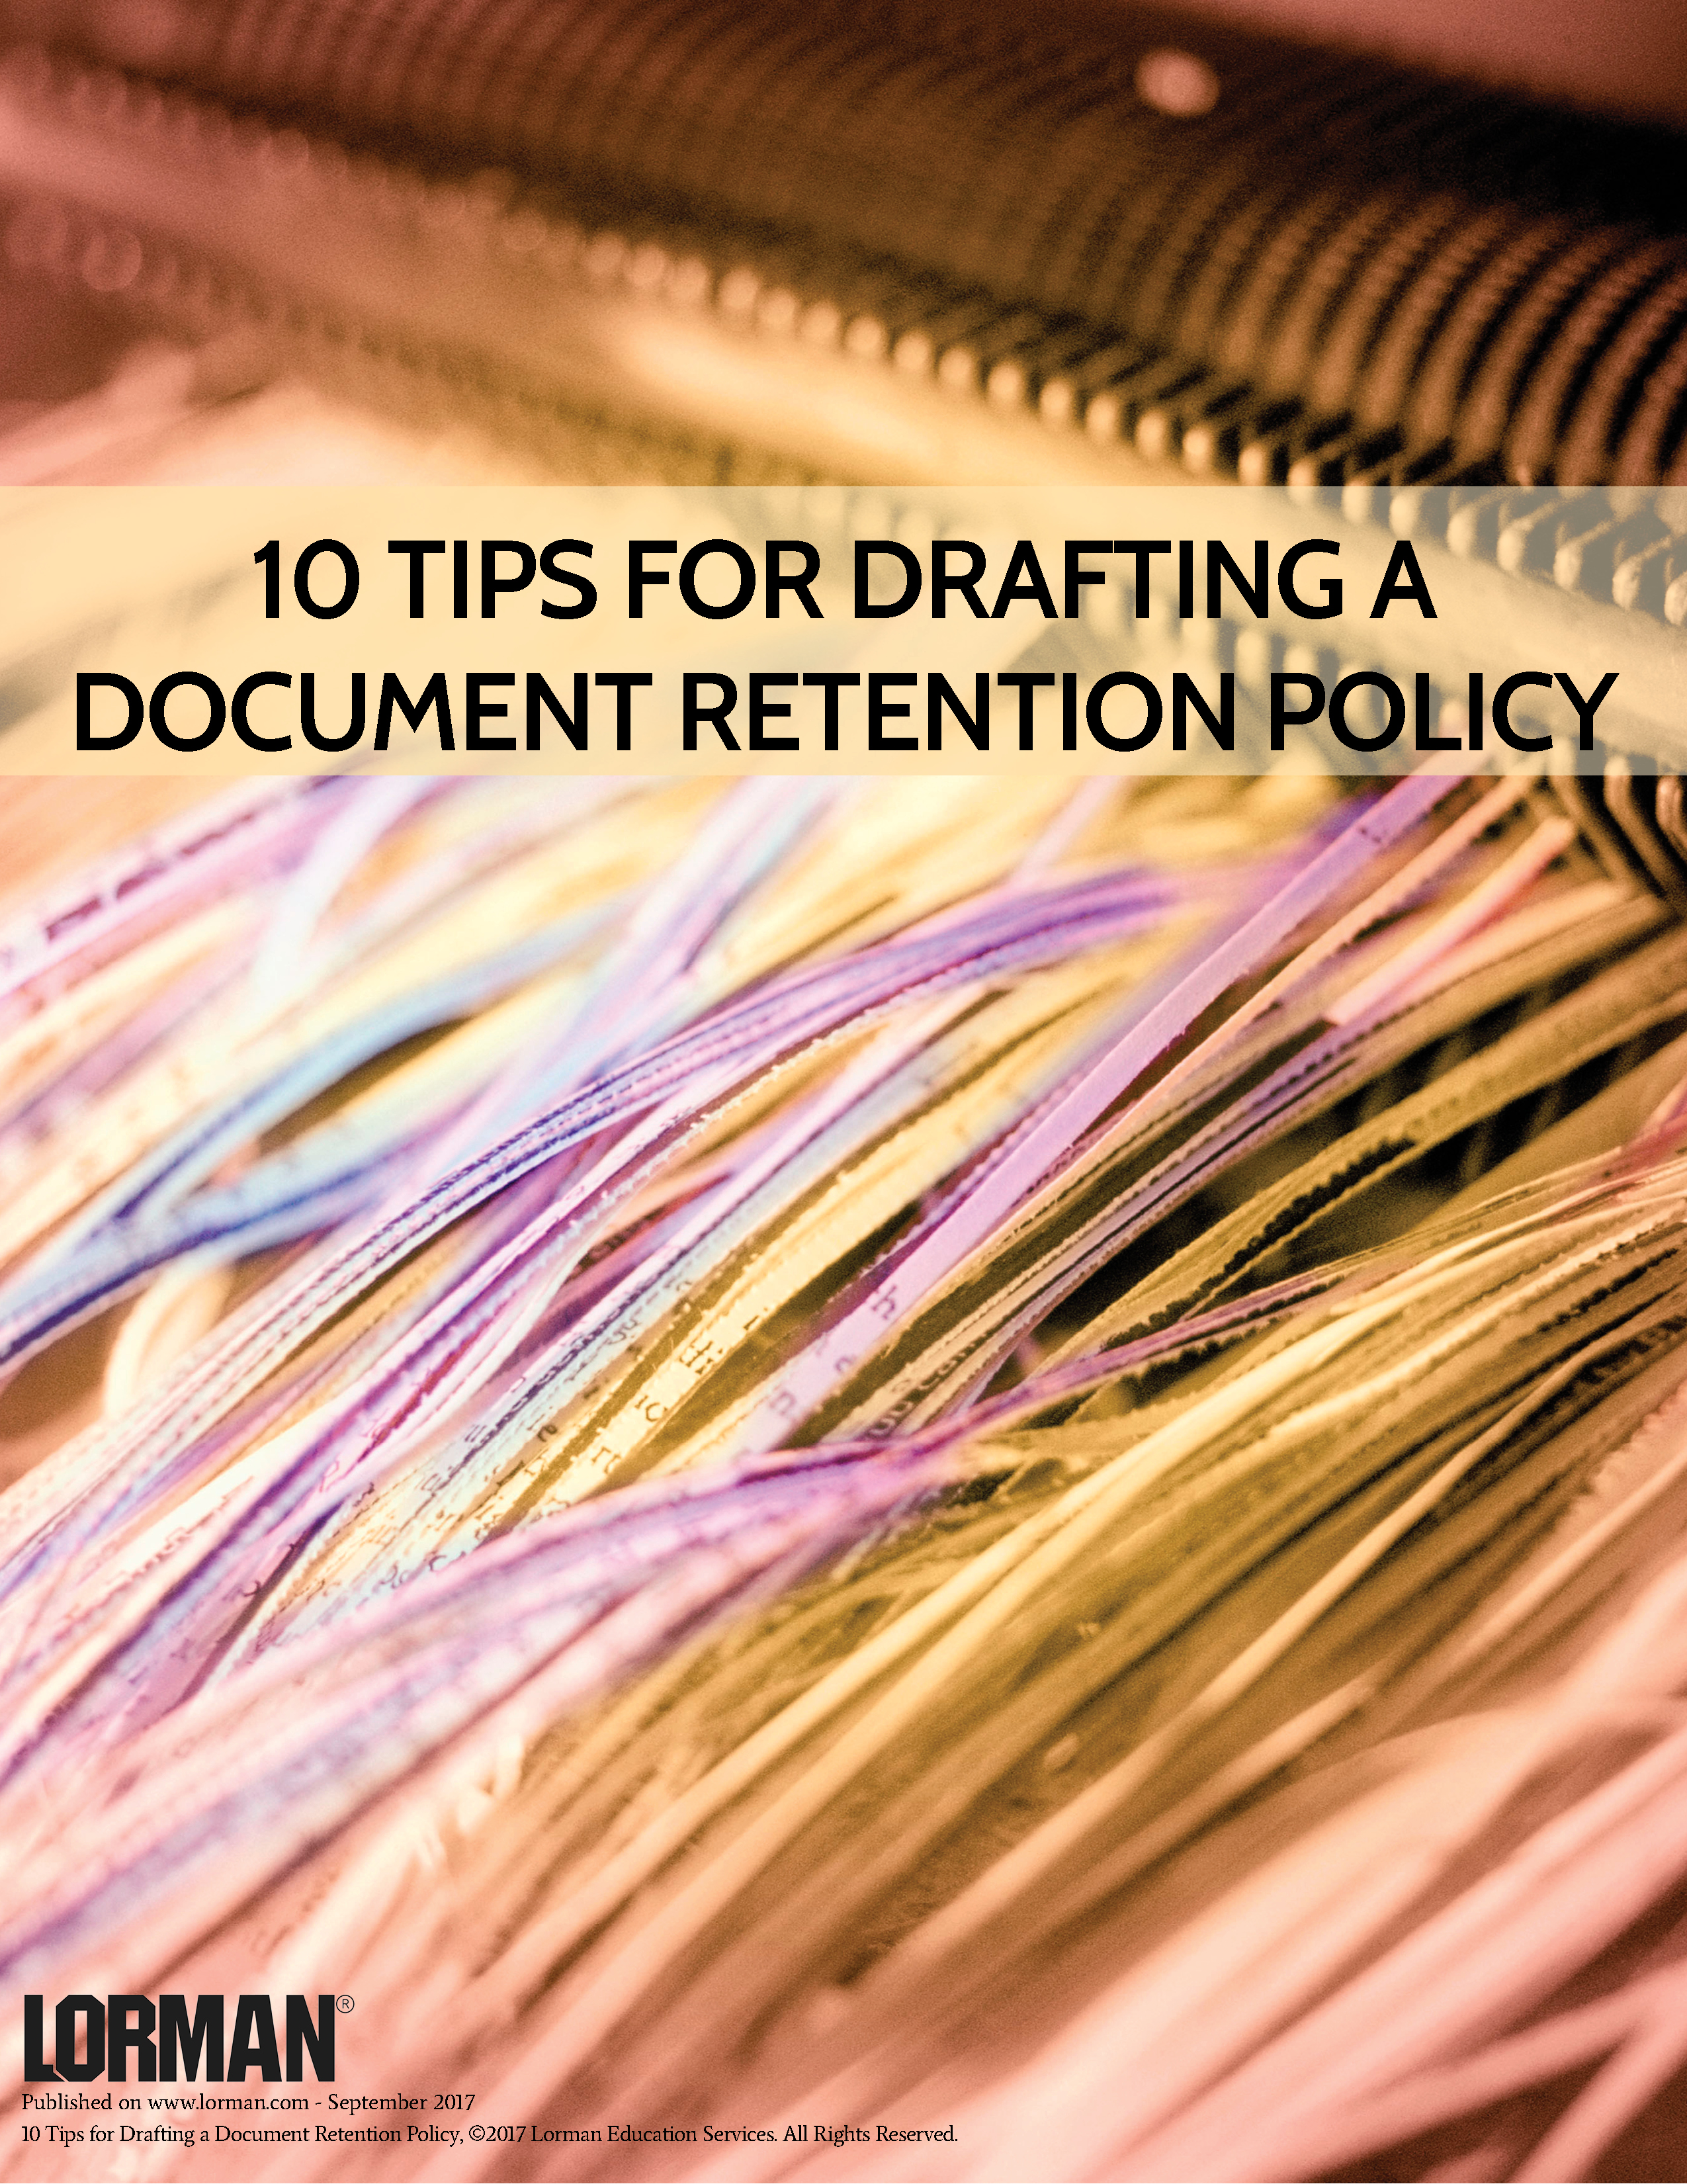 10 Tips for Drafting a Document Retention Policy